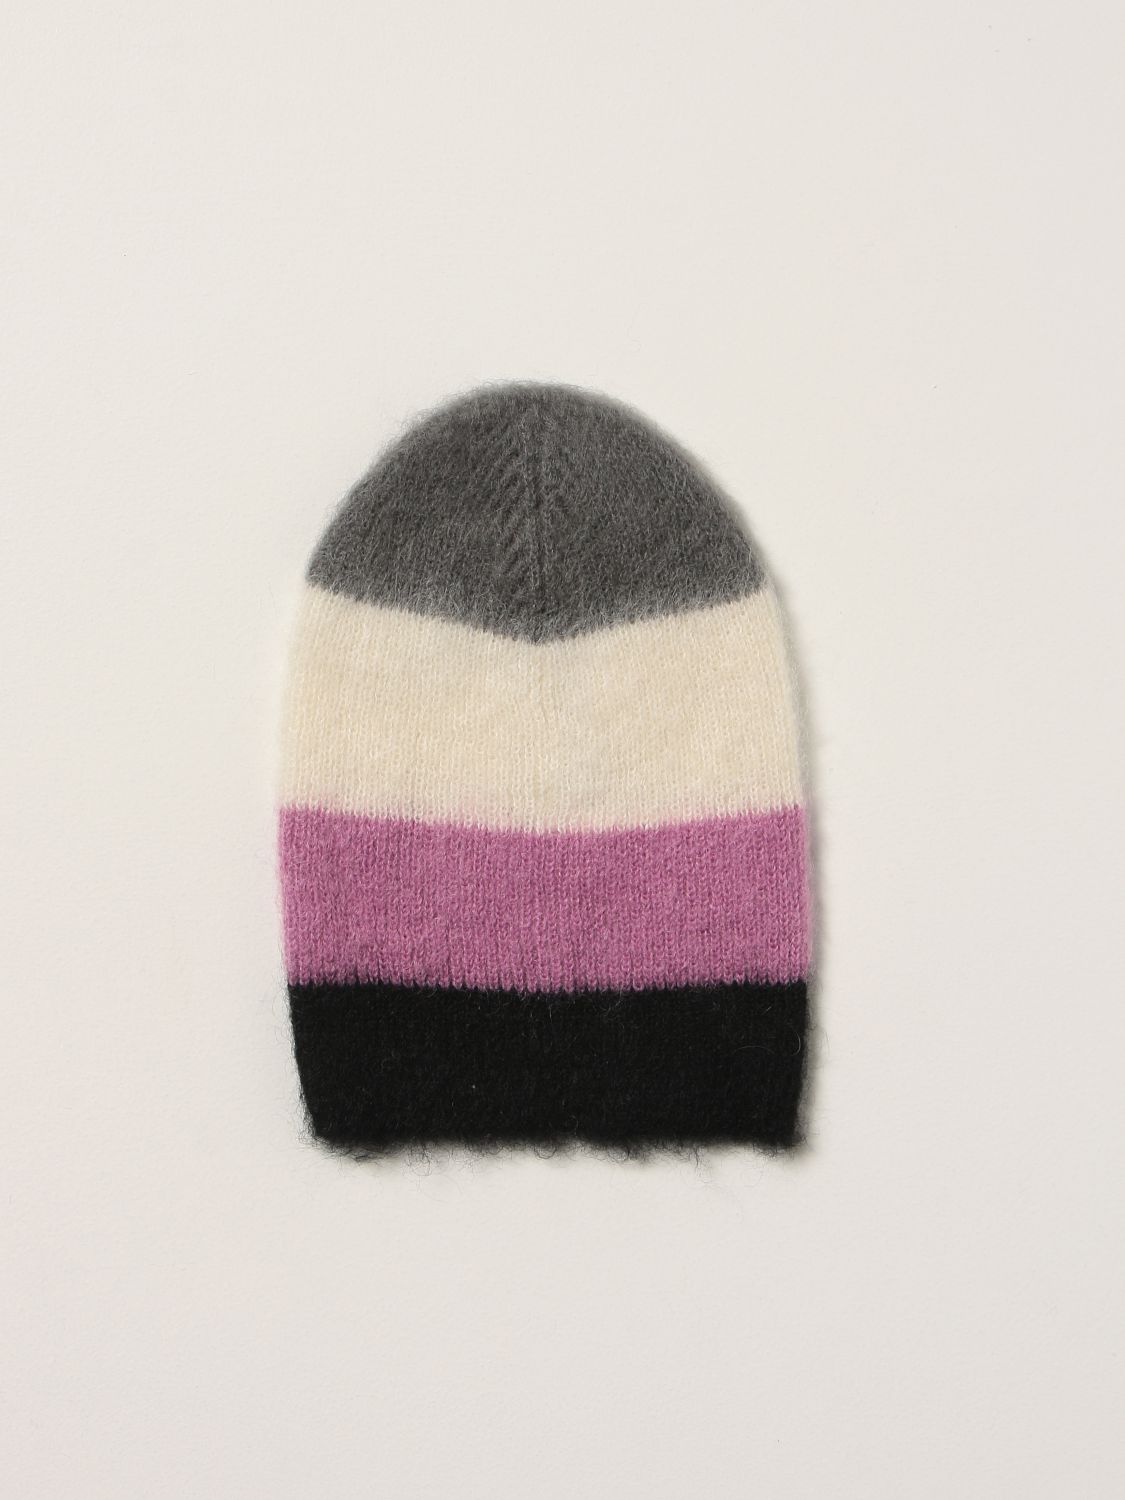 Skælde ud Institut råolie WOOLRICH: hat with colored bands | Hat Woolrich Women Fuchsia | Hat Woolrich  CFWWAC0112FRUF0261 GIGLIO.COM